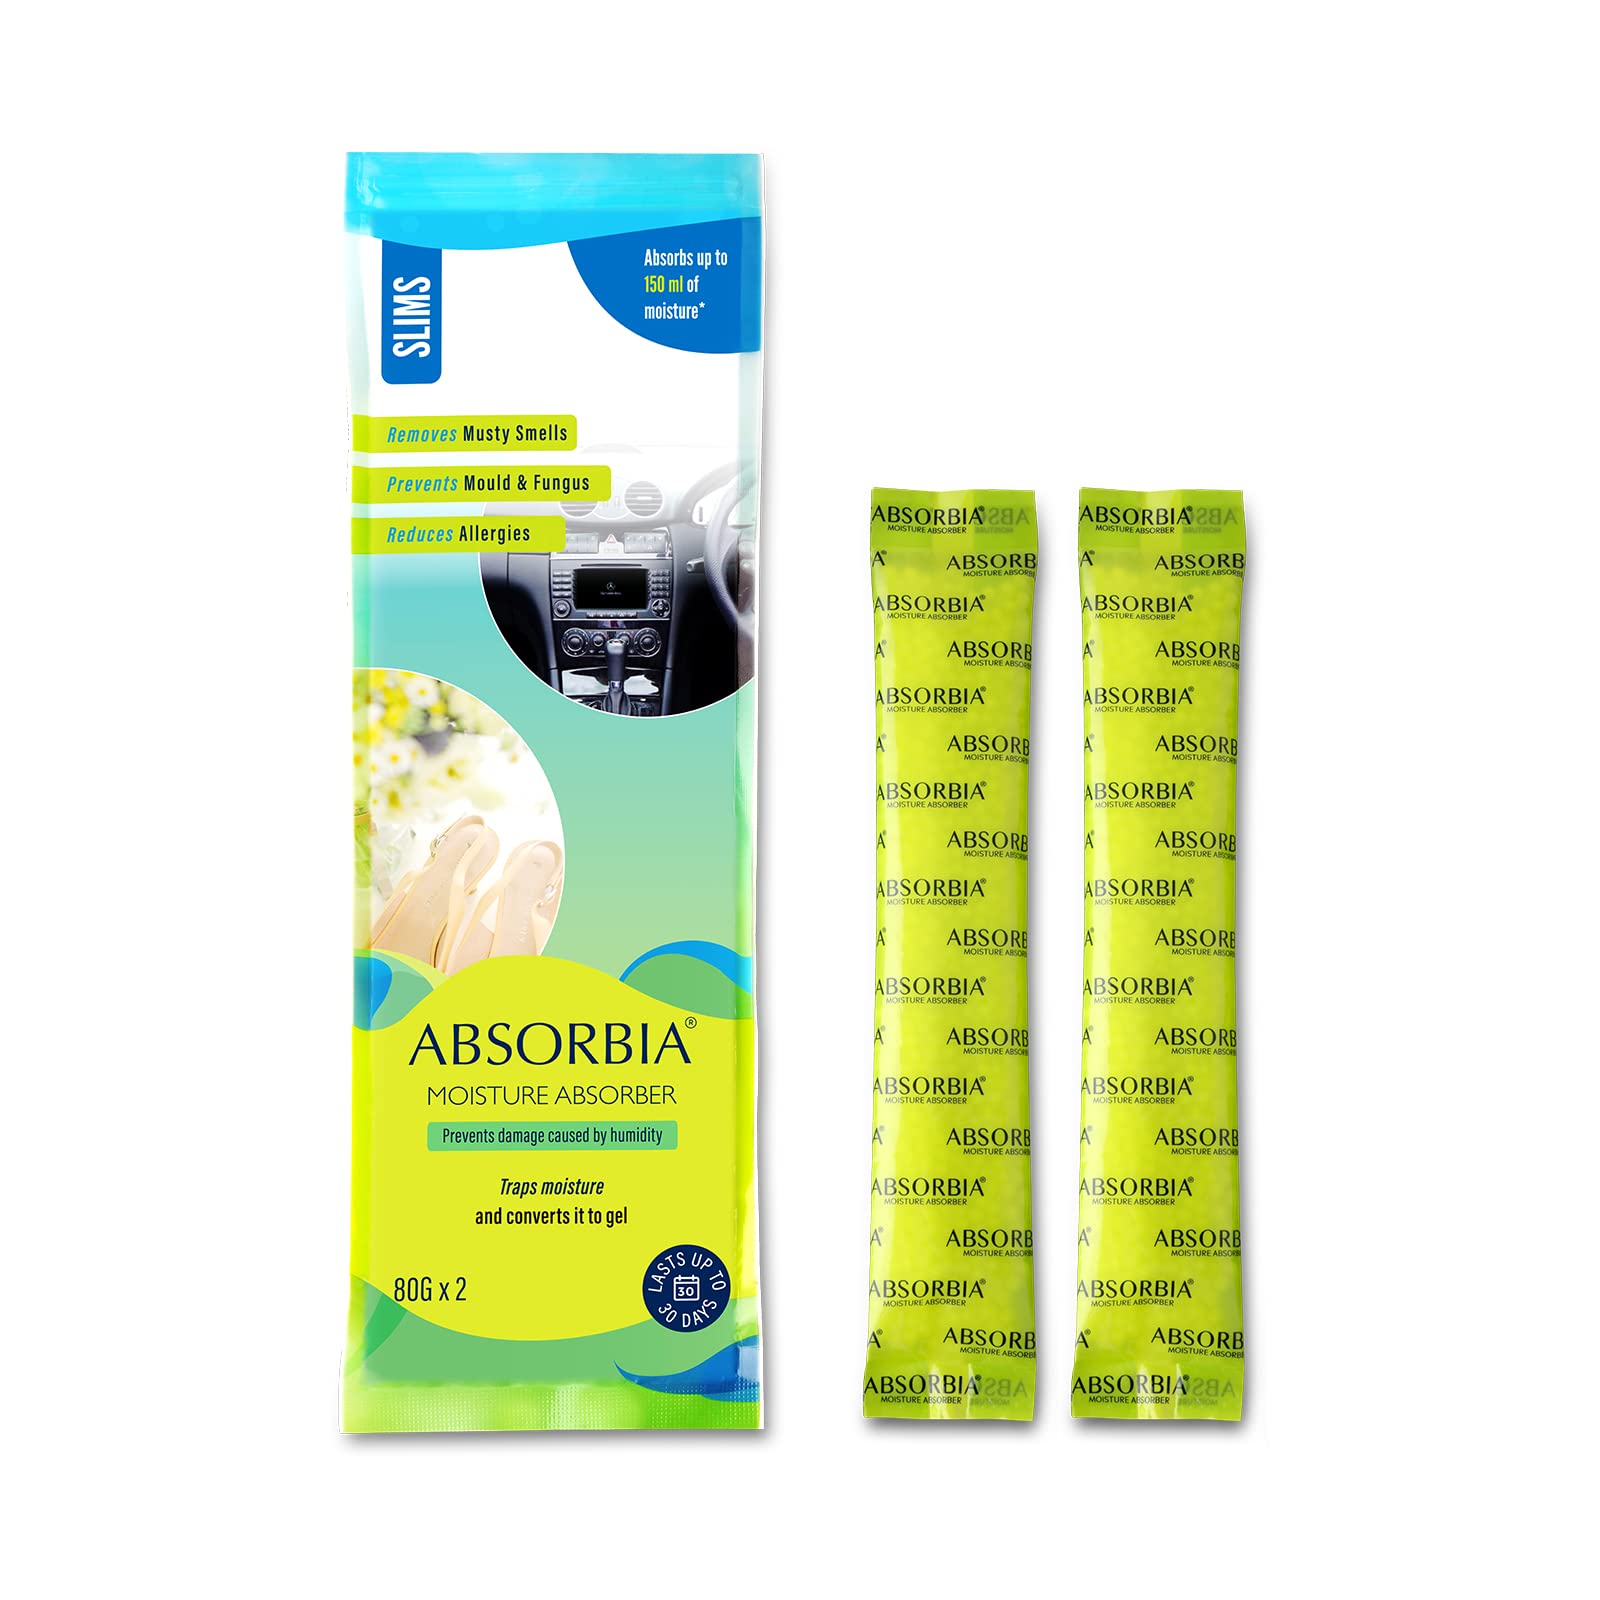 Absorbia Moisture Absorber | Absorbia Slim Sachet Pack of 8(160ml Each) | Dehumidifier for Cars, Drawers, Bed boxes Shoe Racks| Fights Against Moulds…